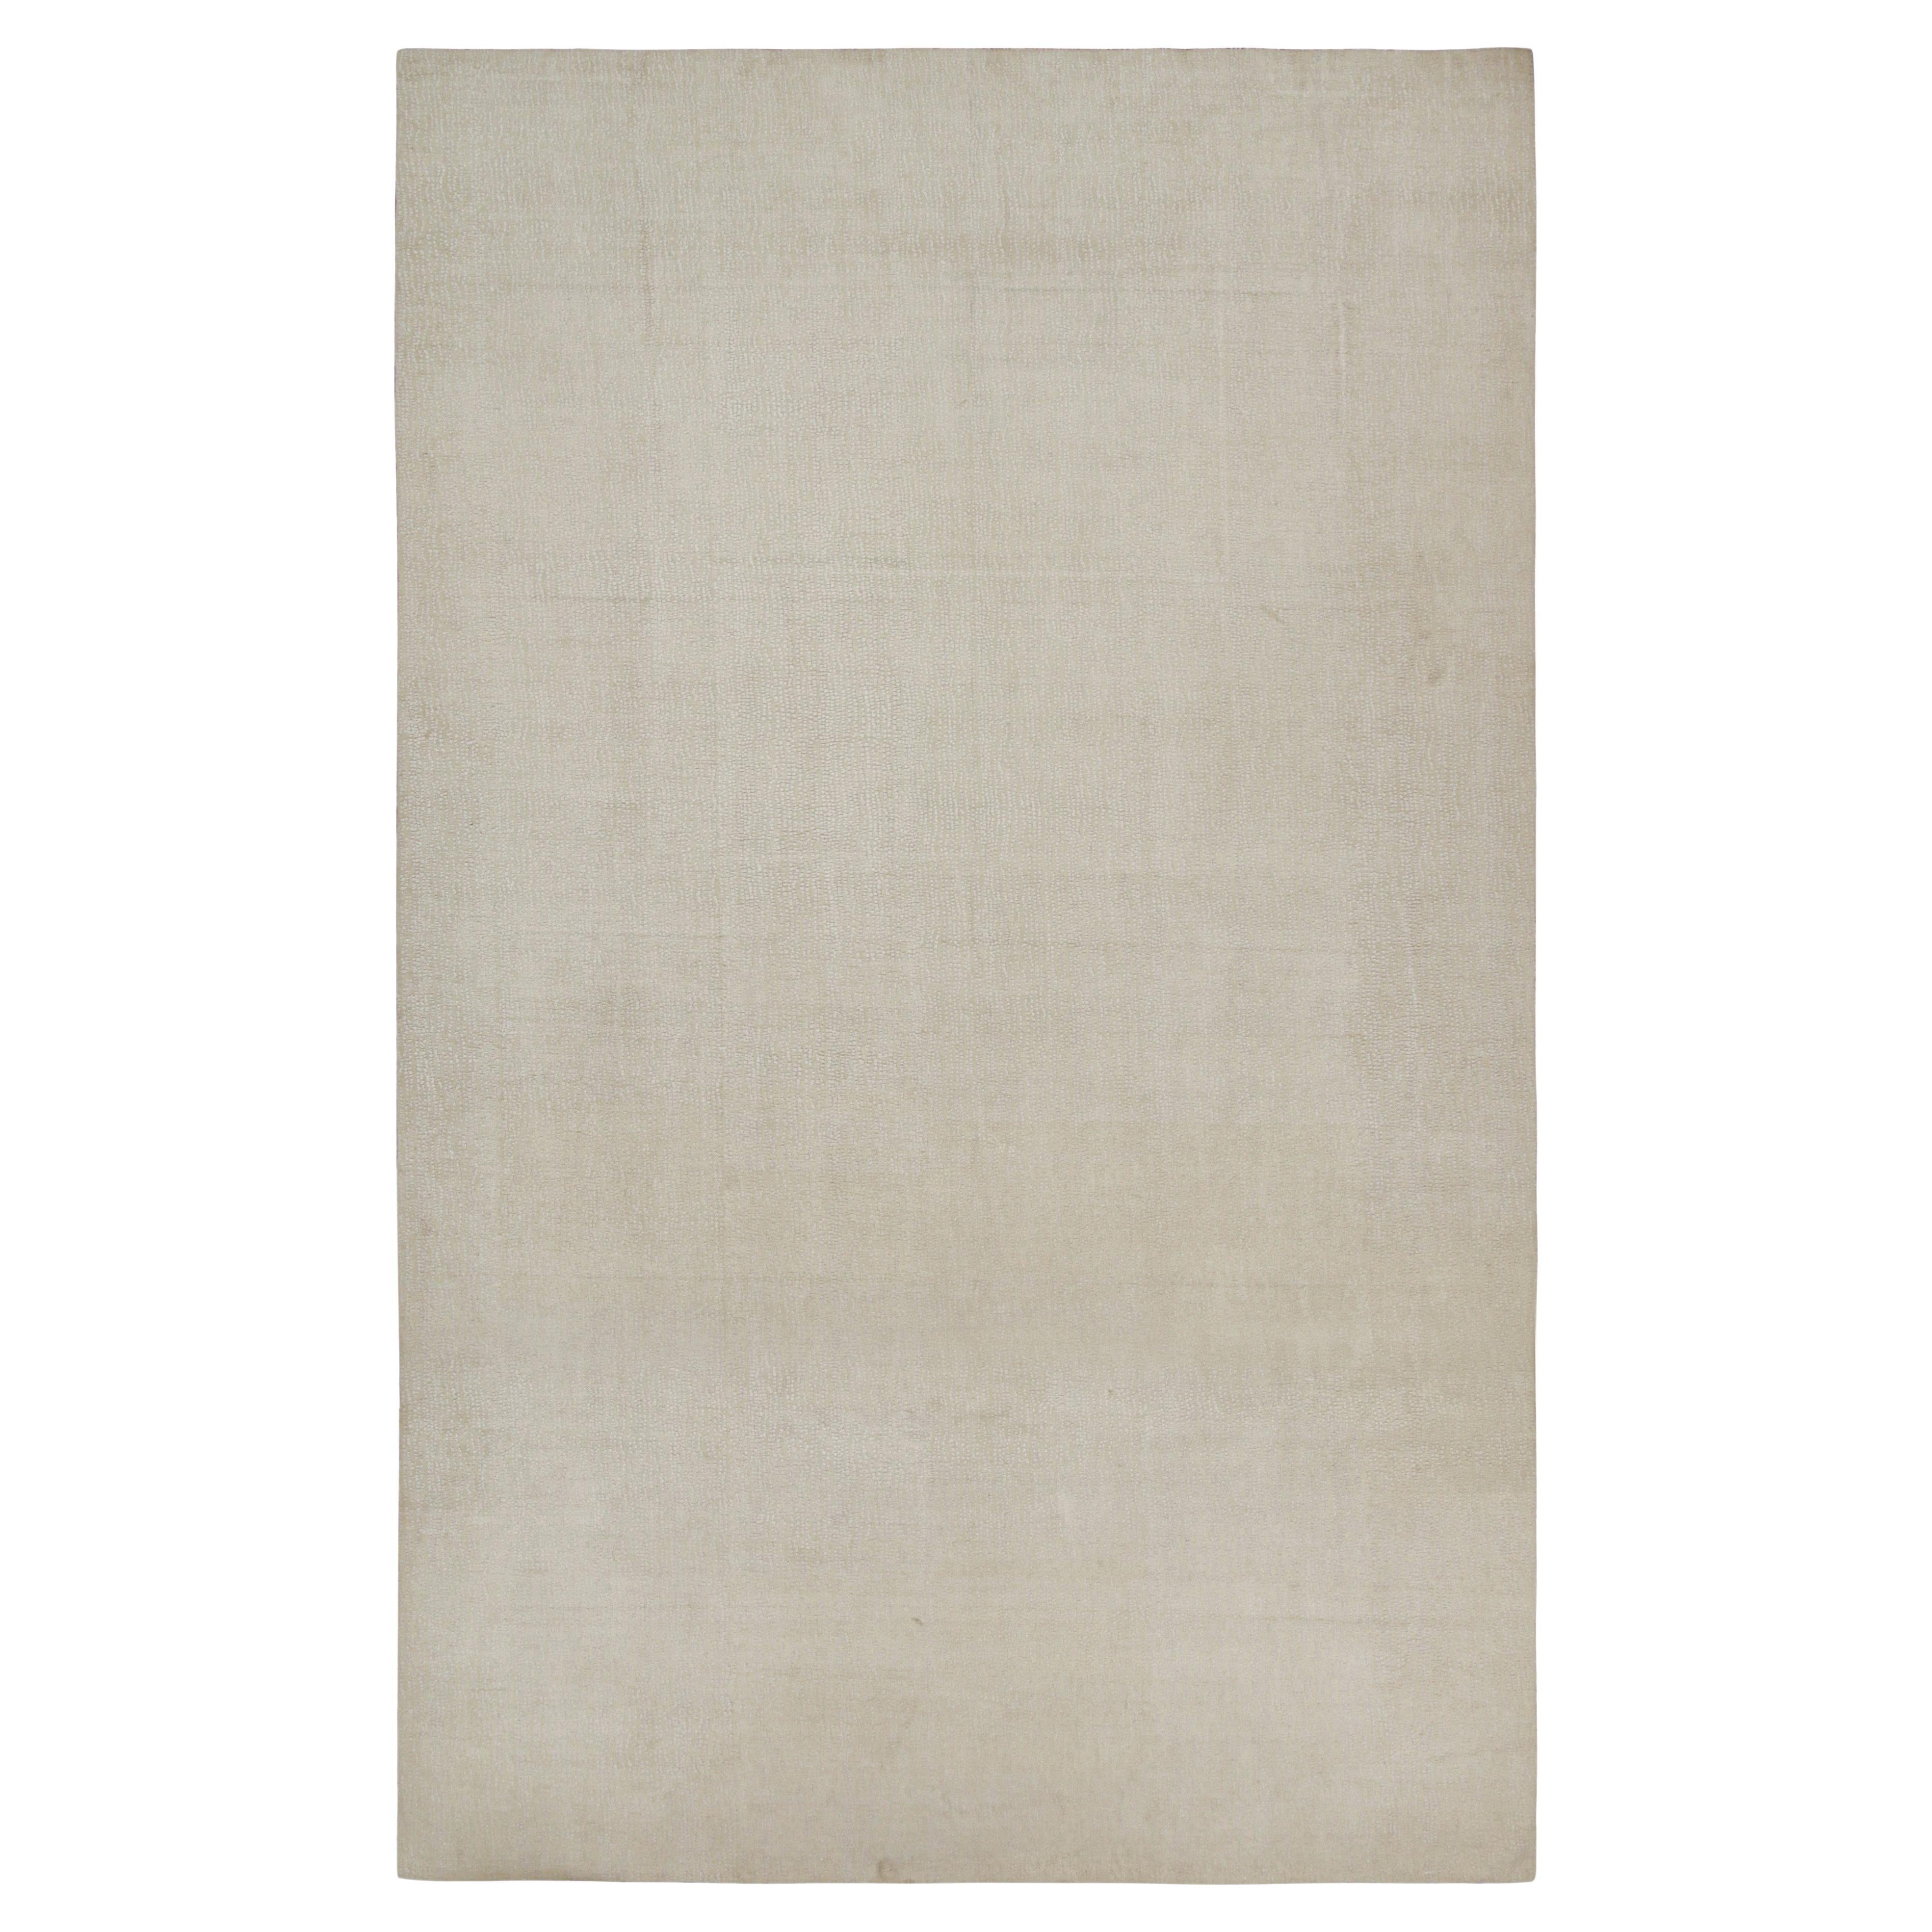 Rug & Kilim’s Modern High-and-Low Textural Rug Design in Off White